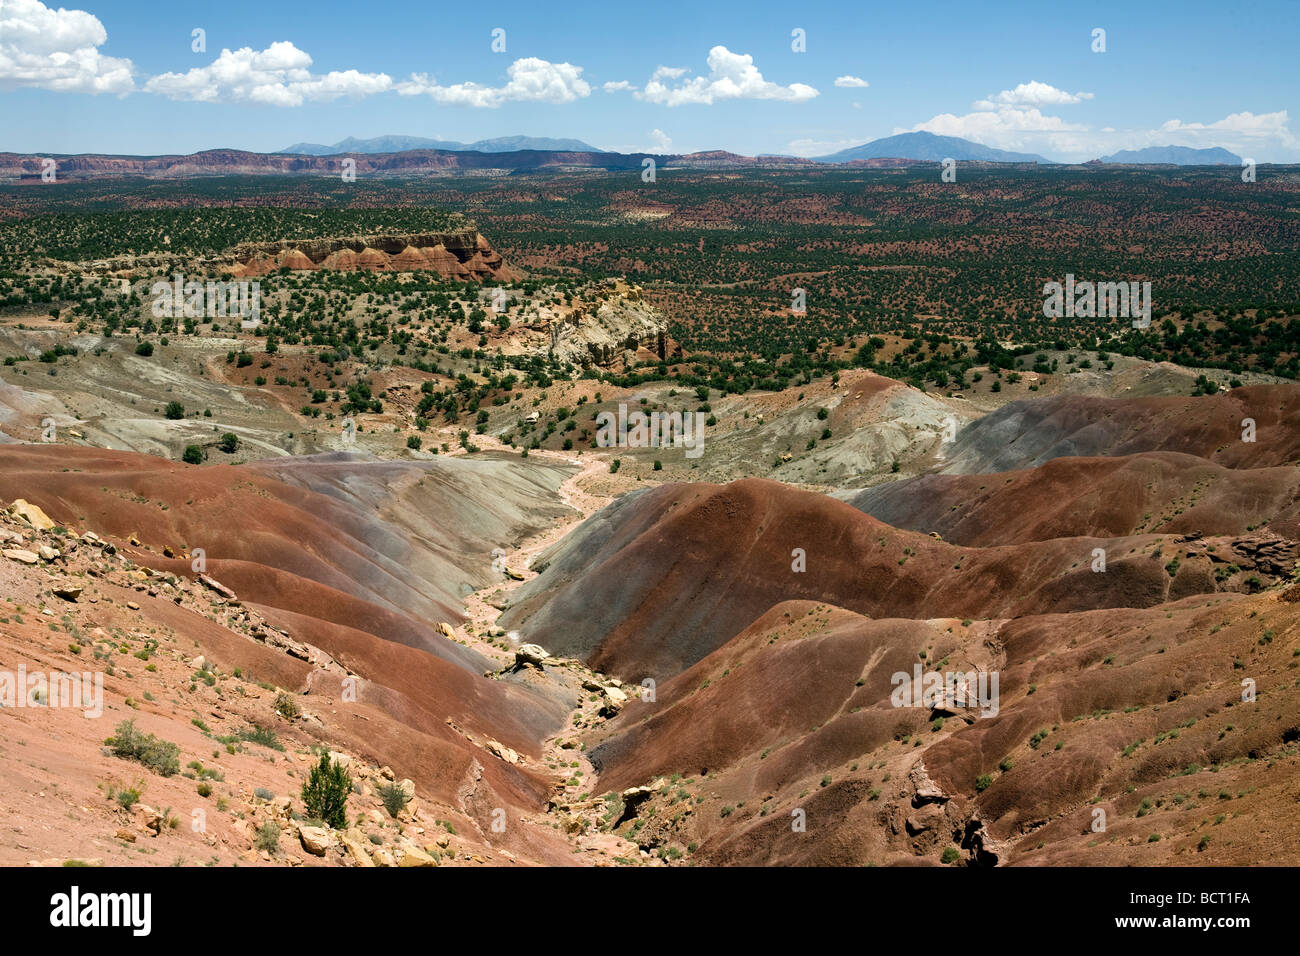 Elevated view of the Grand Staircase Escalante national Monument area north of the city of Escalante Utah Stock Photo